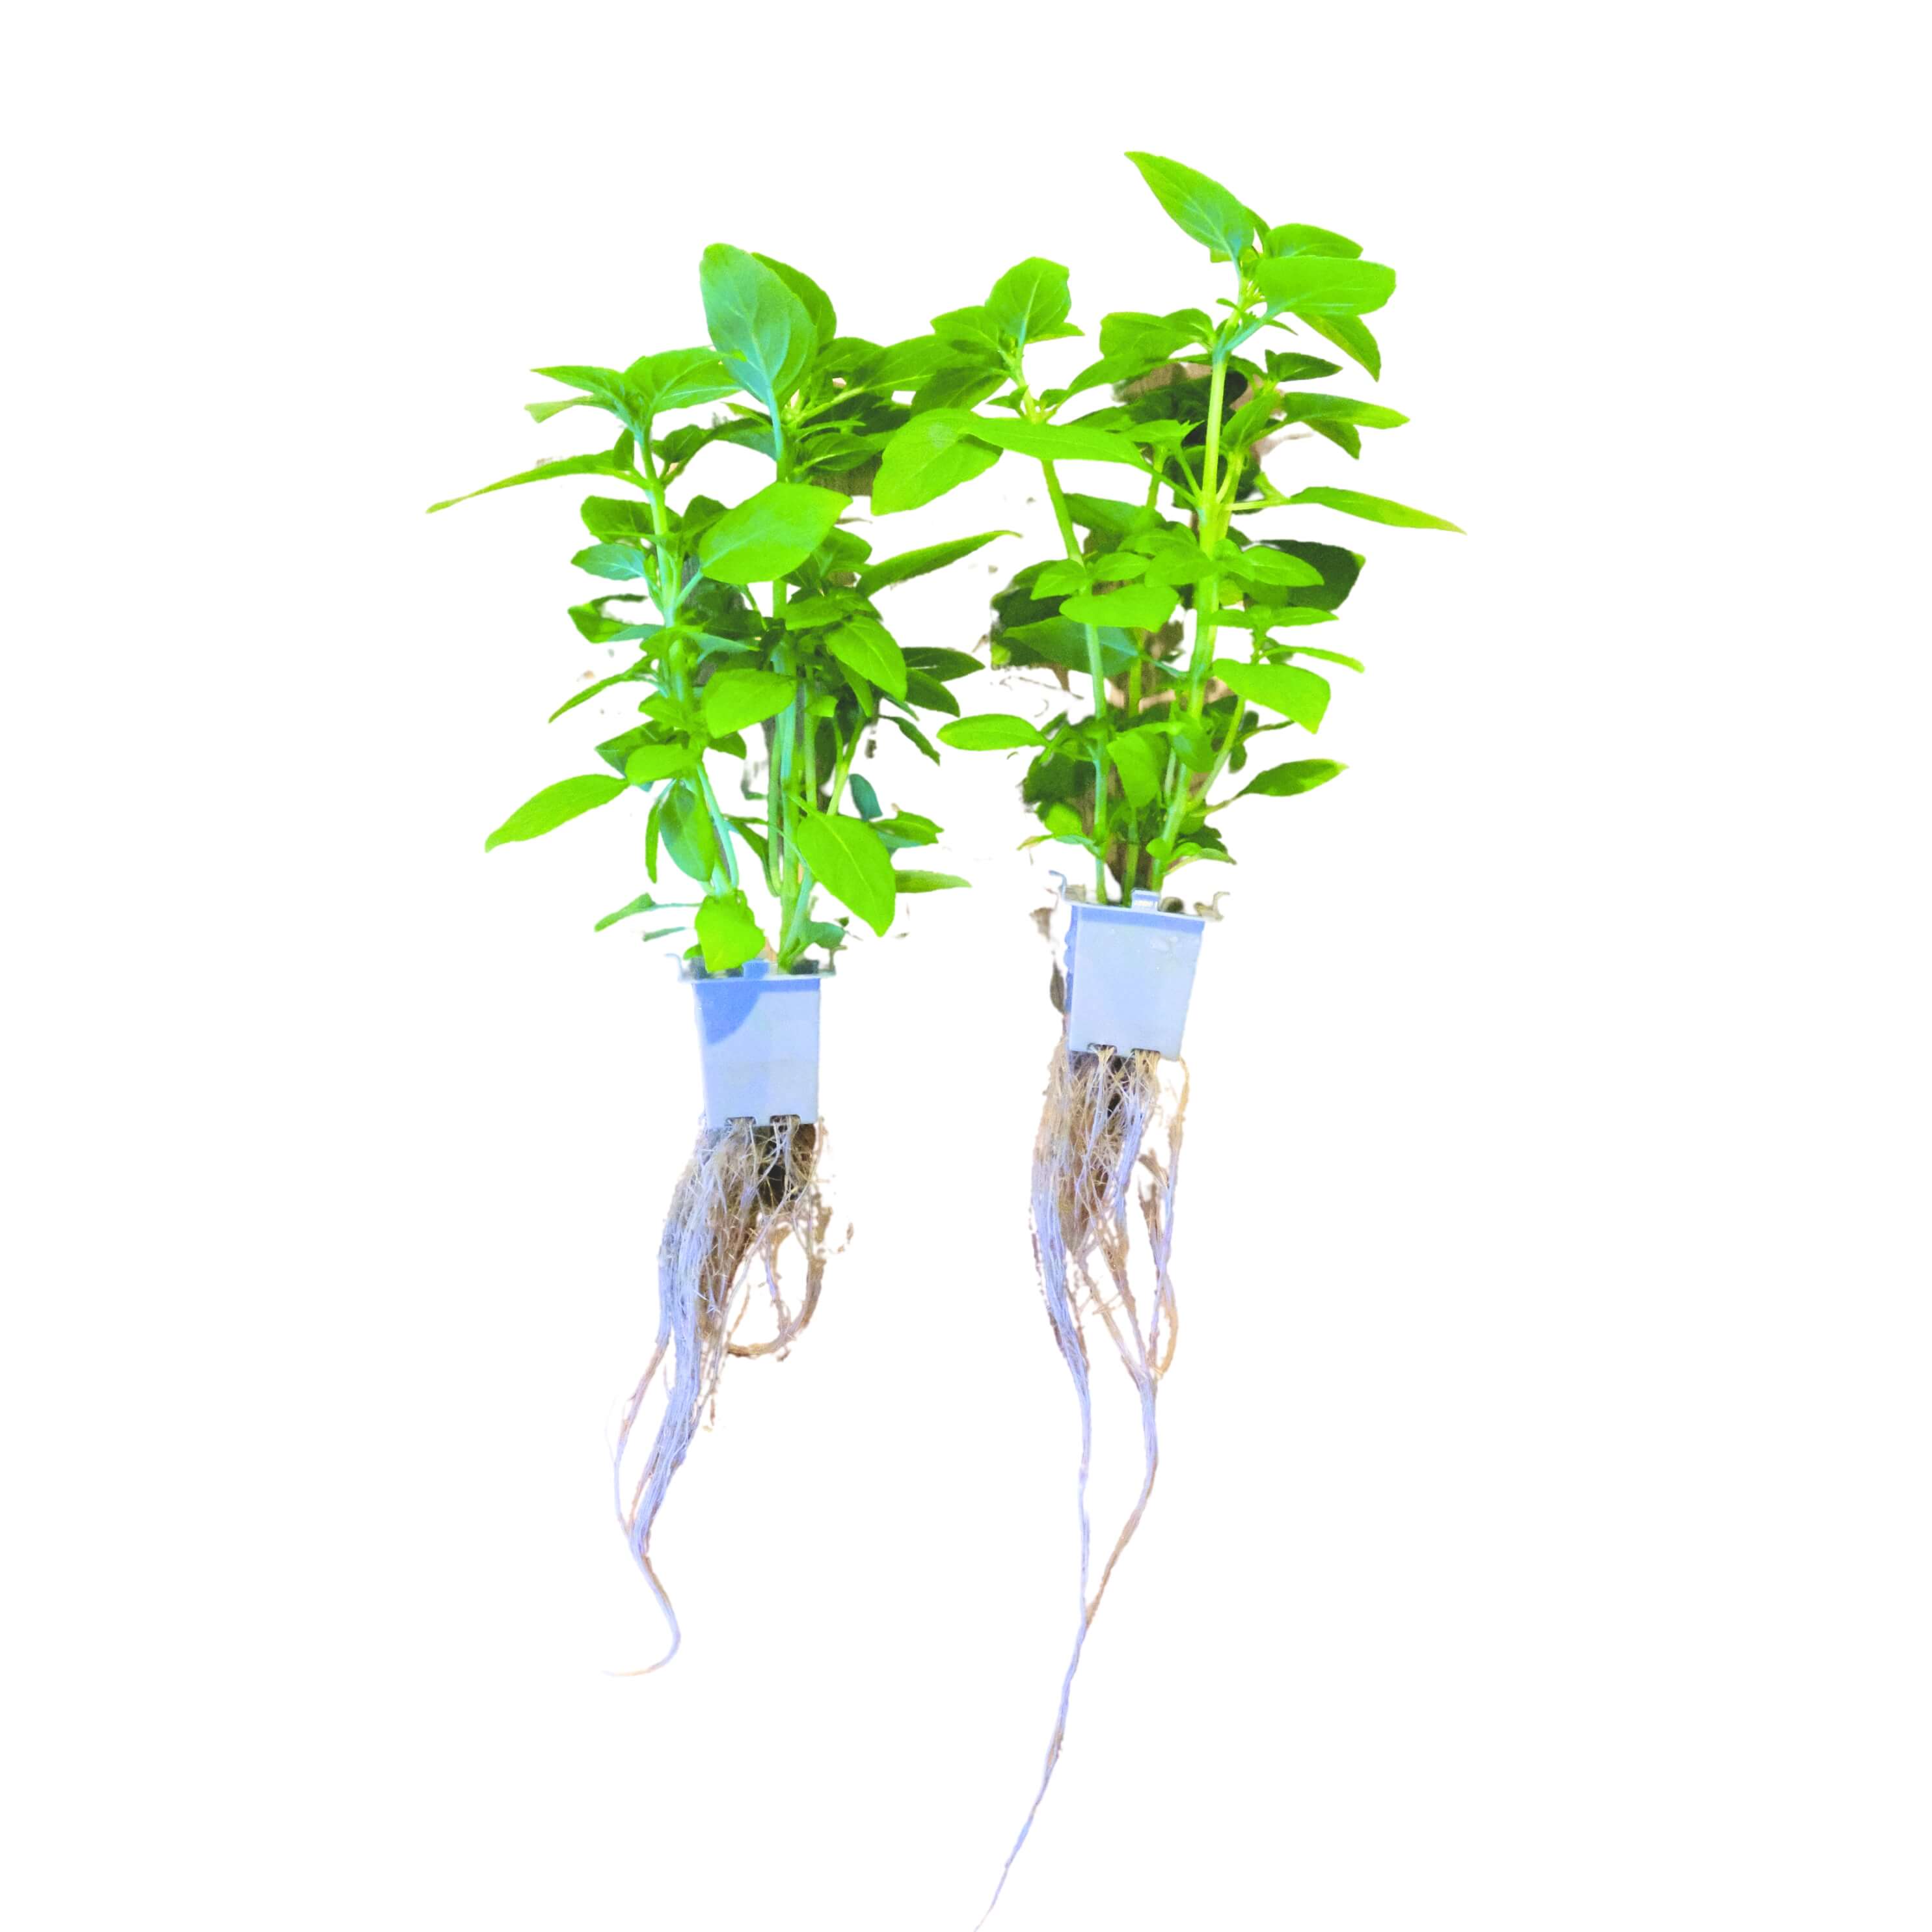 Greek Basil(32x - Subscription Only)